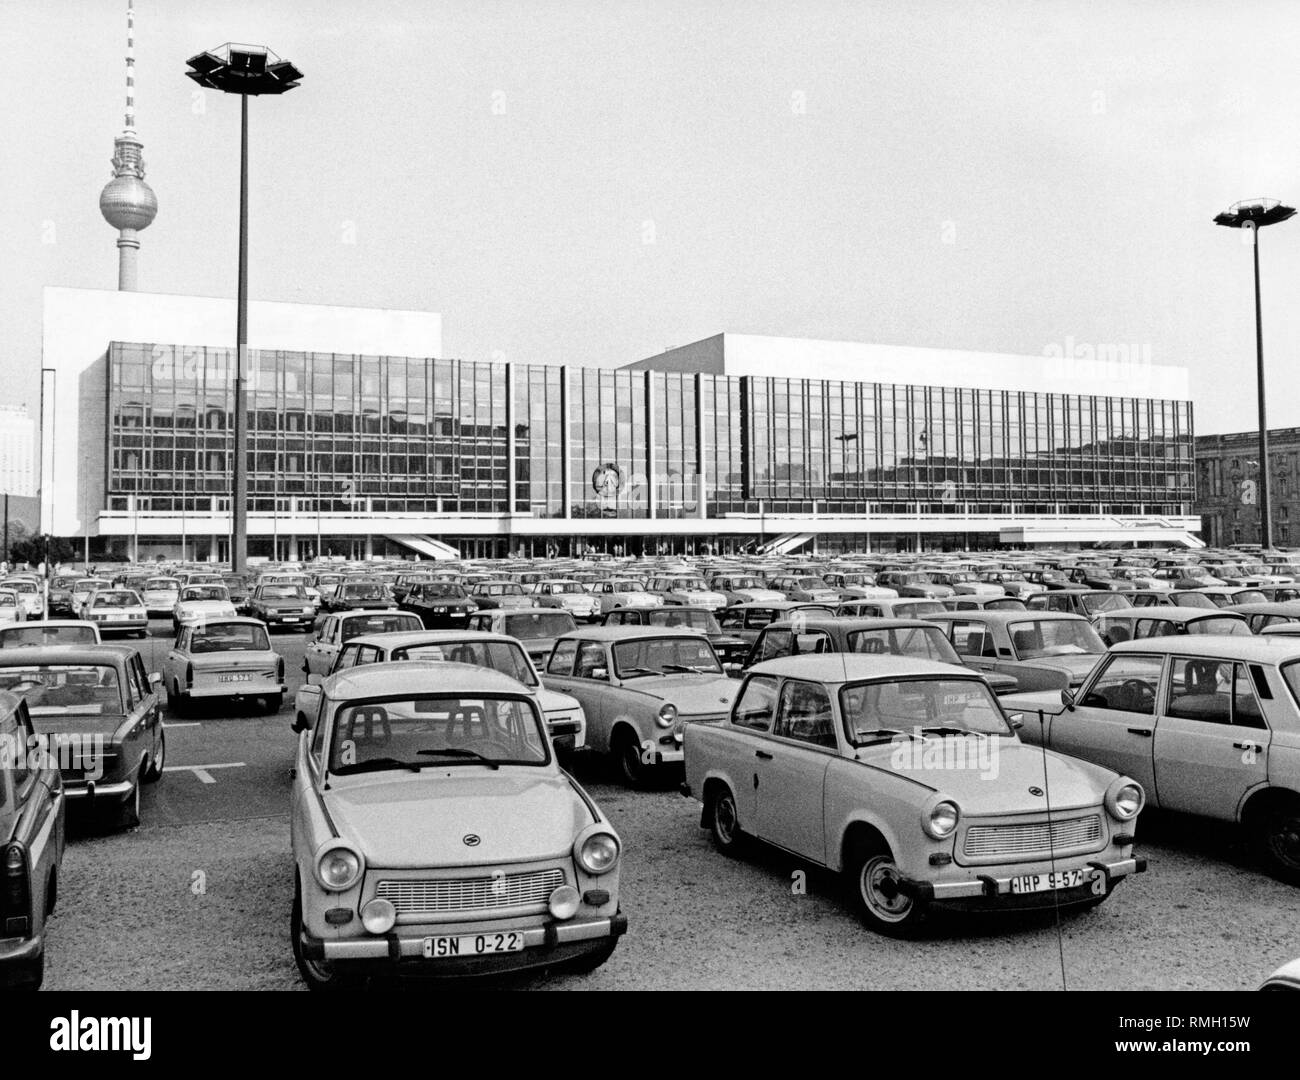 Parking lot in front of the Palast der Republik in Berlin. Stock Photo